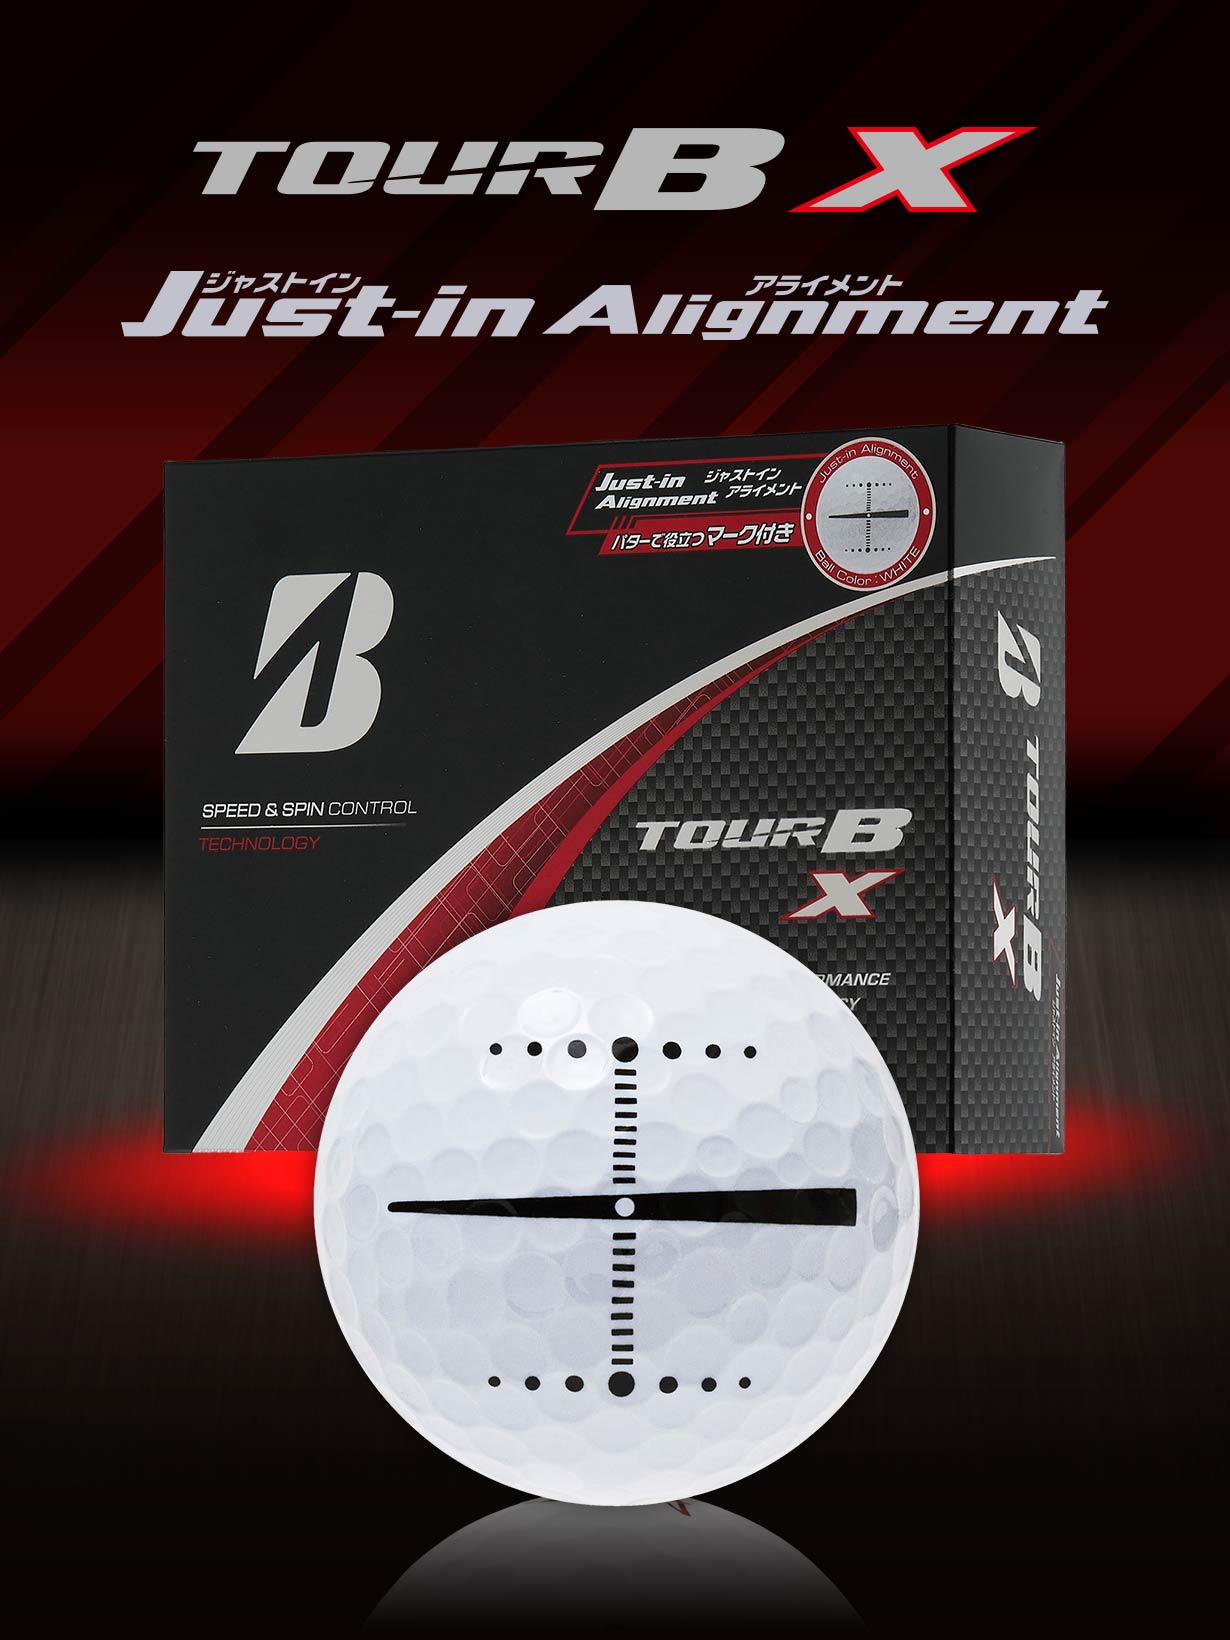 TOUR B X Just-in Alignment